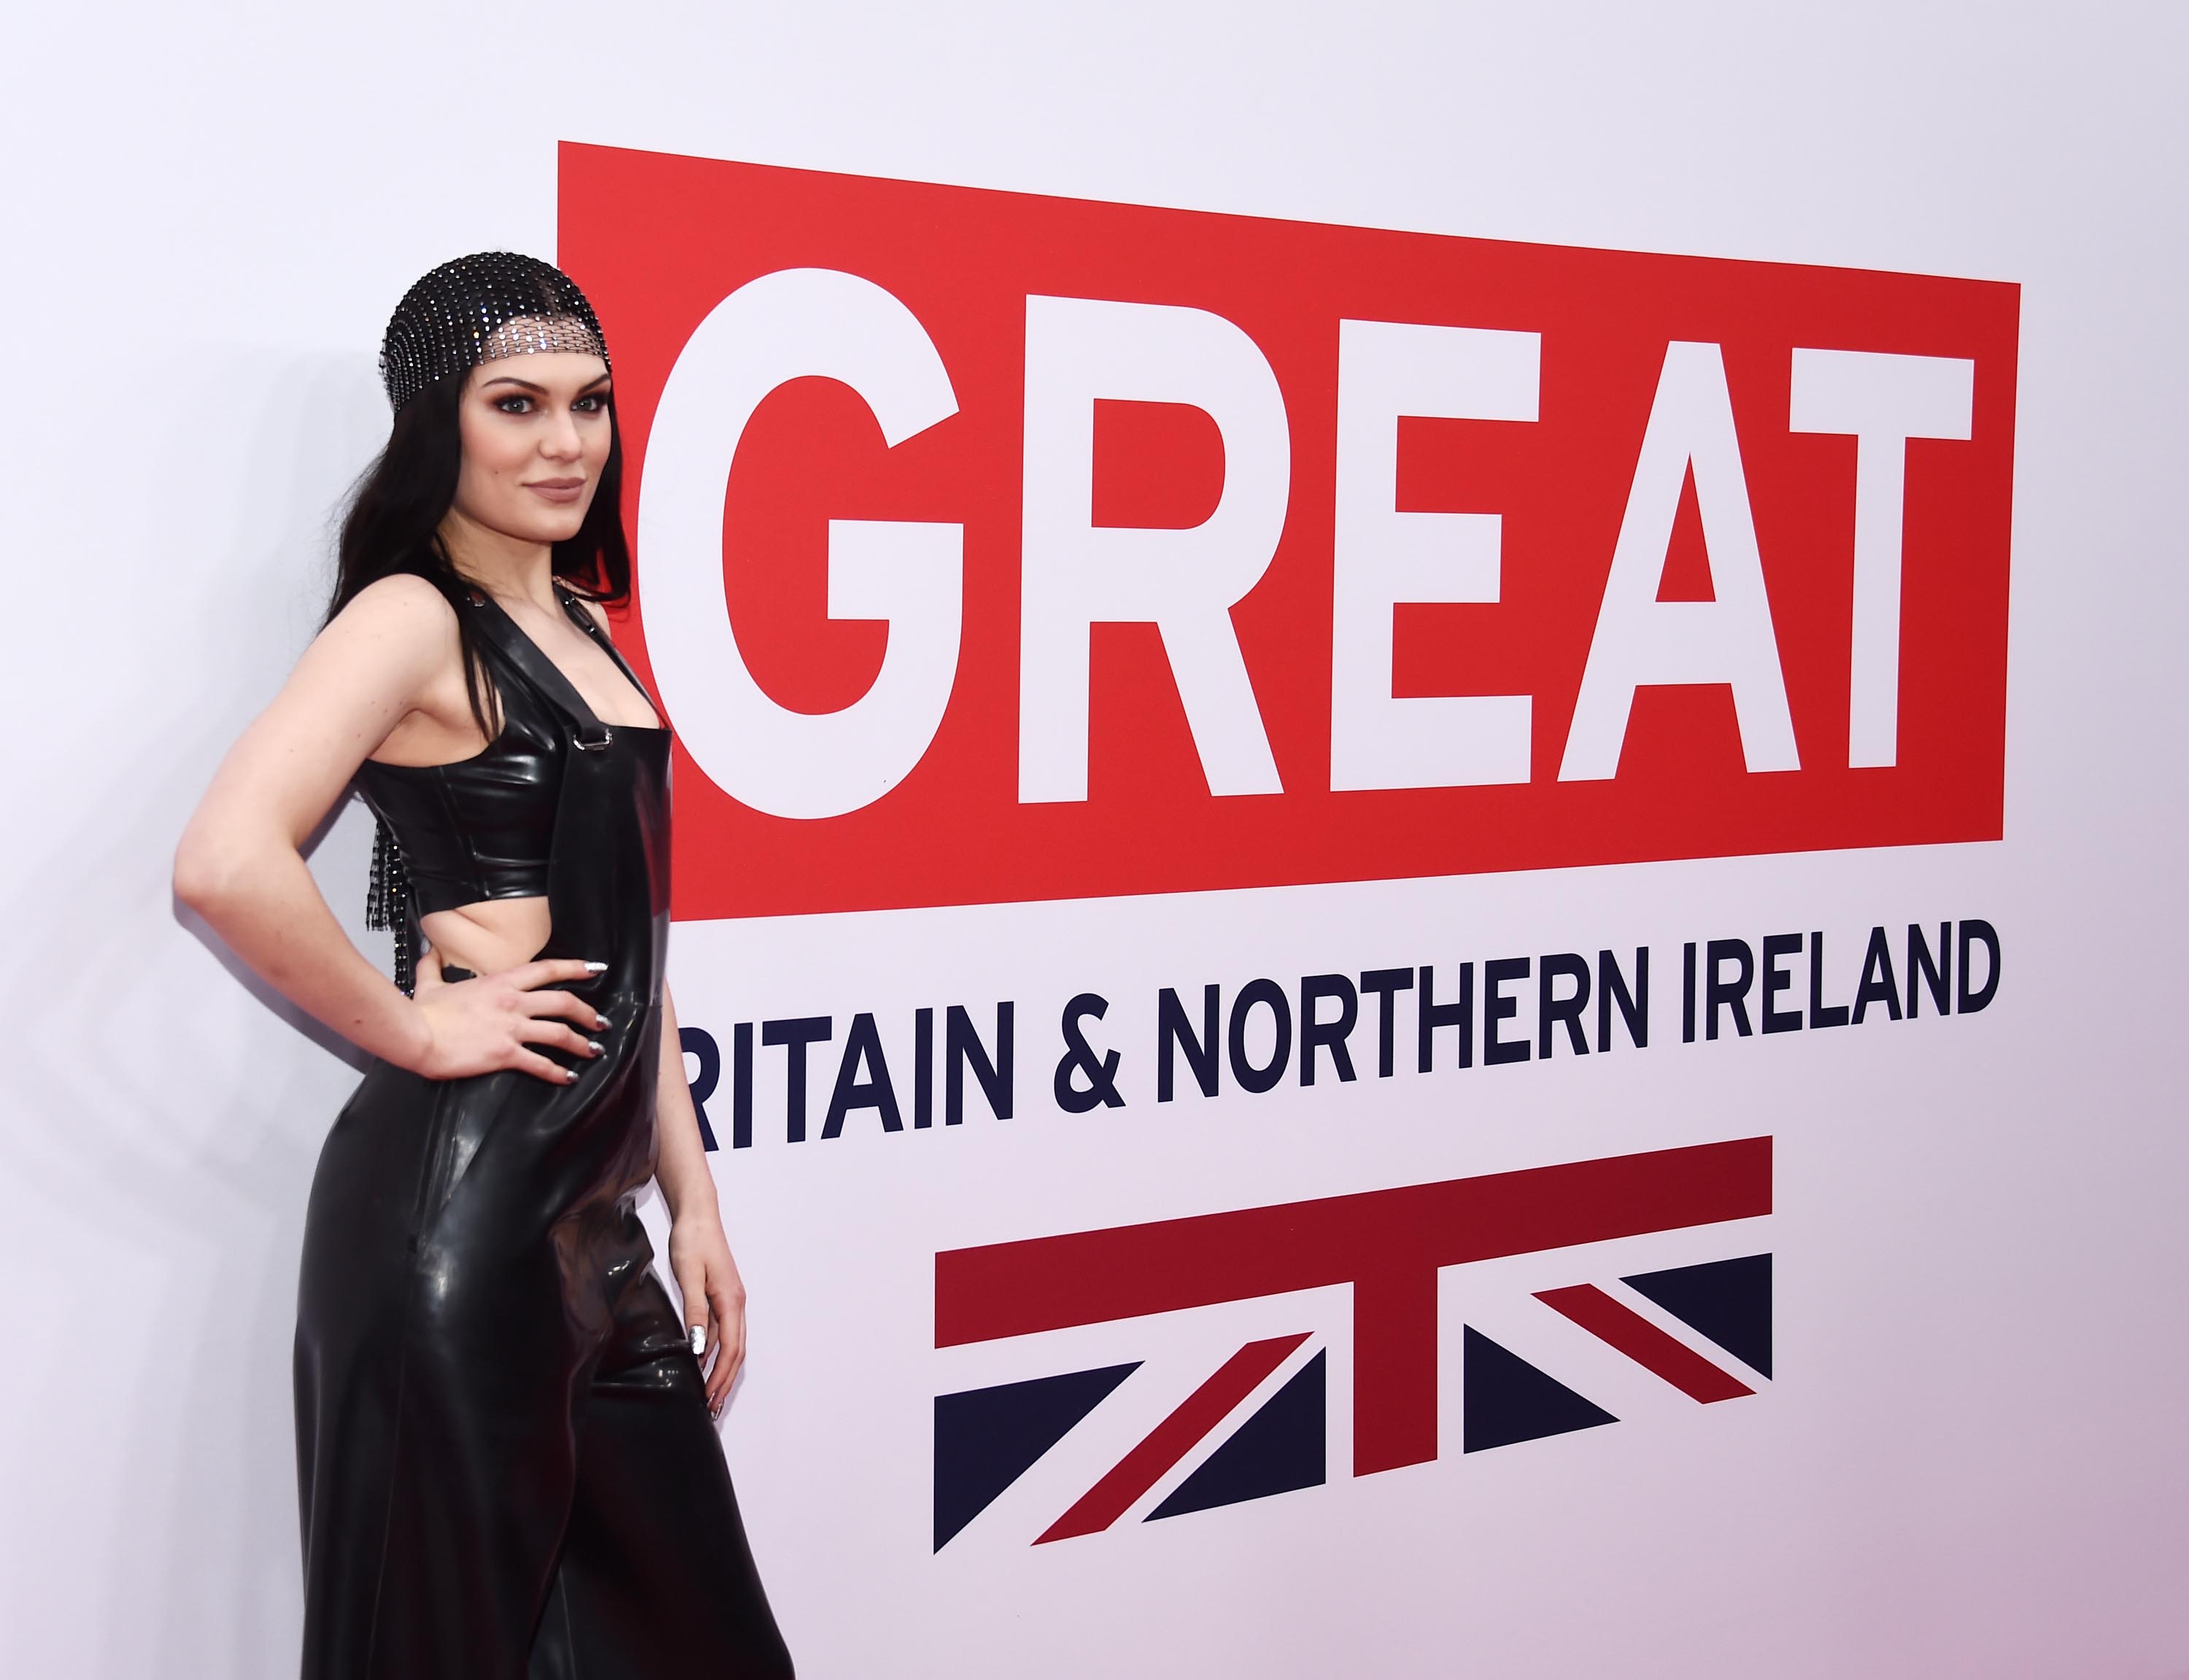 Jessie J arrives at The GREAT Film Reception to Honor the British Nominees